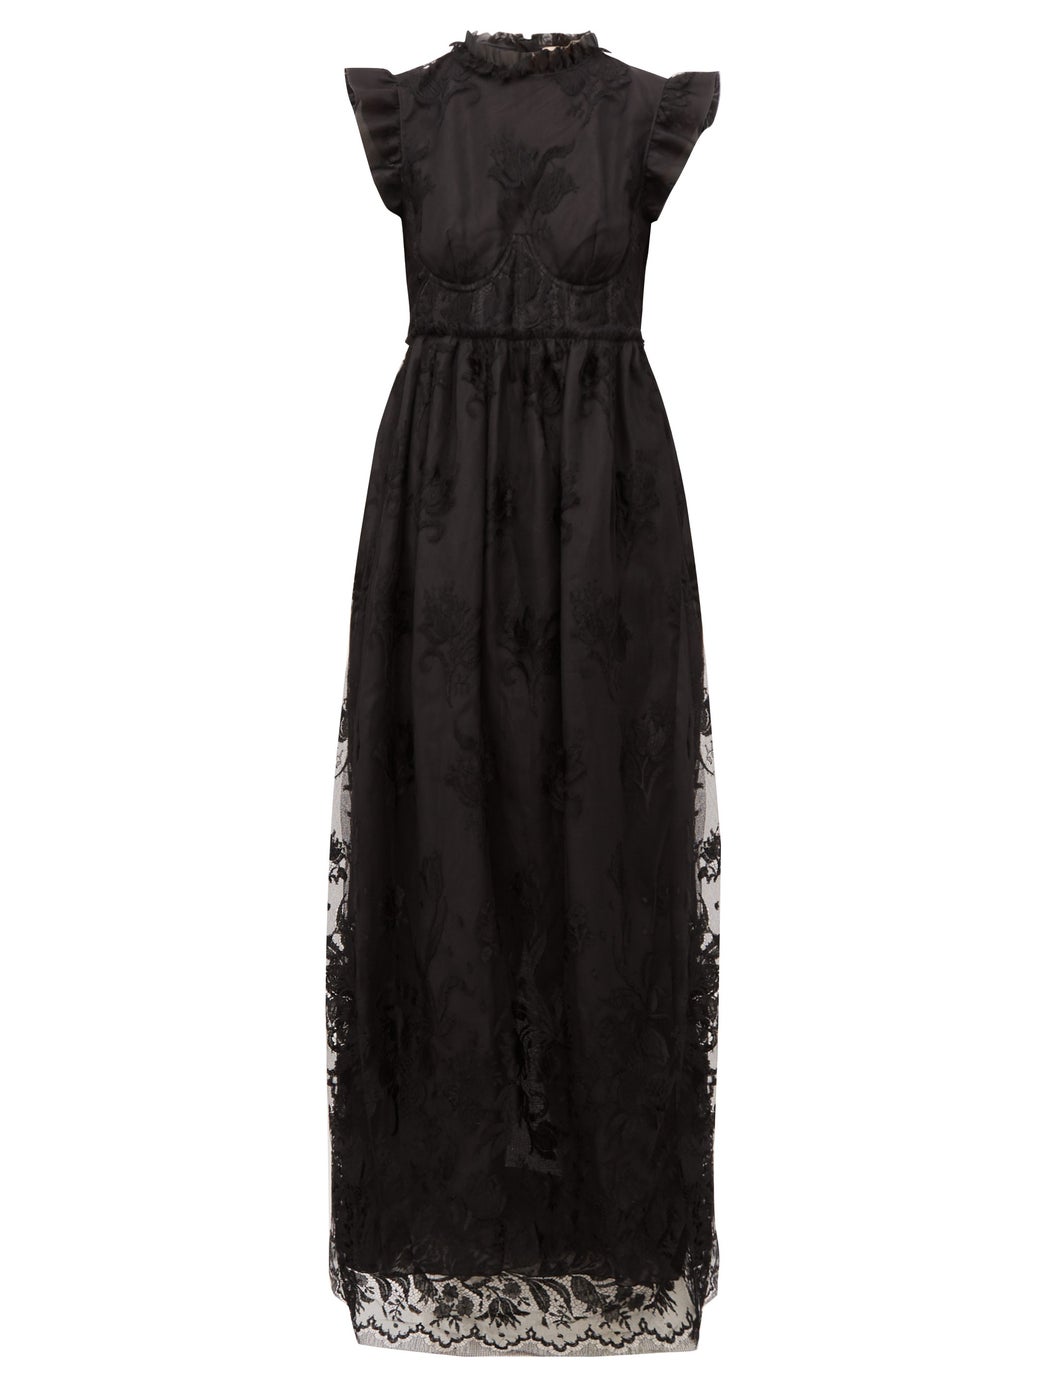 Brock Collection + Patricia Ruffled Guipure-Lace Dress